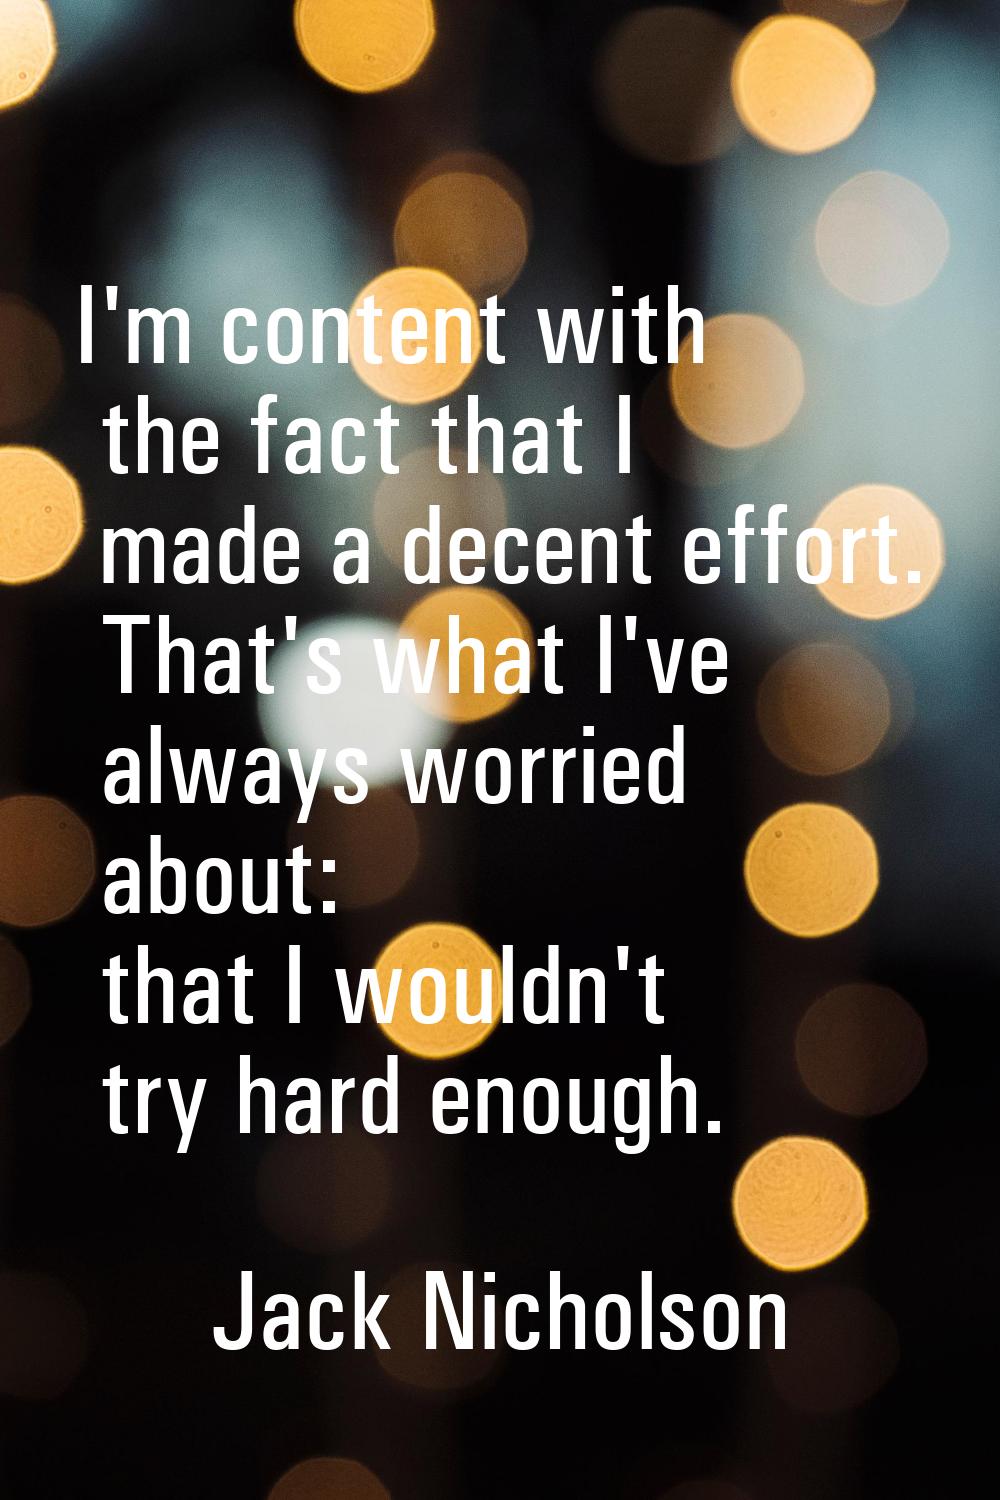 I'm content with the fact that I made a decent effort. That's what I've always worried about: that 